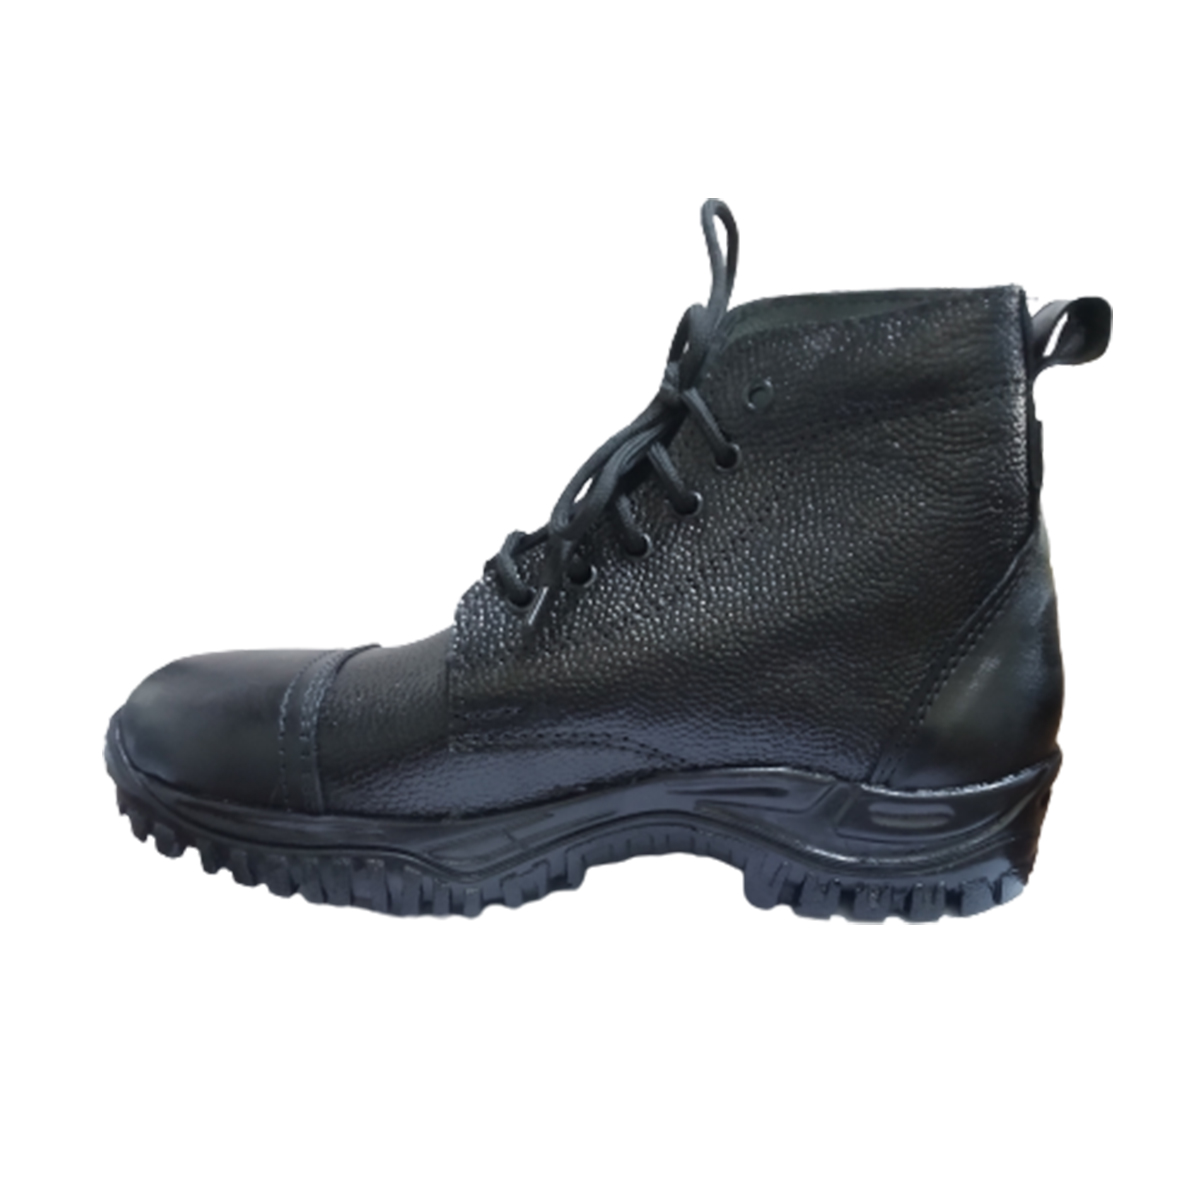 High Ankle Army Dms Shoes Manufacturers, Suppliers in Pune